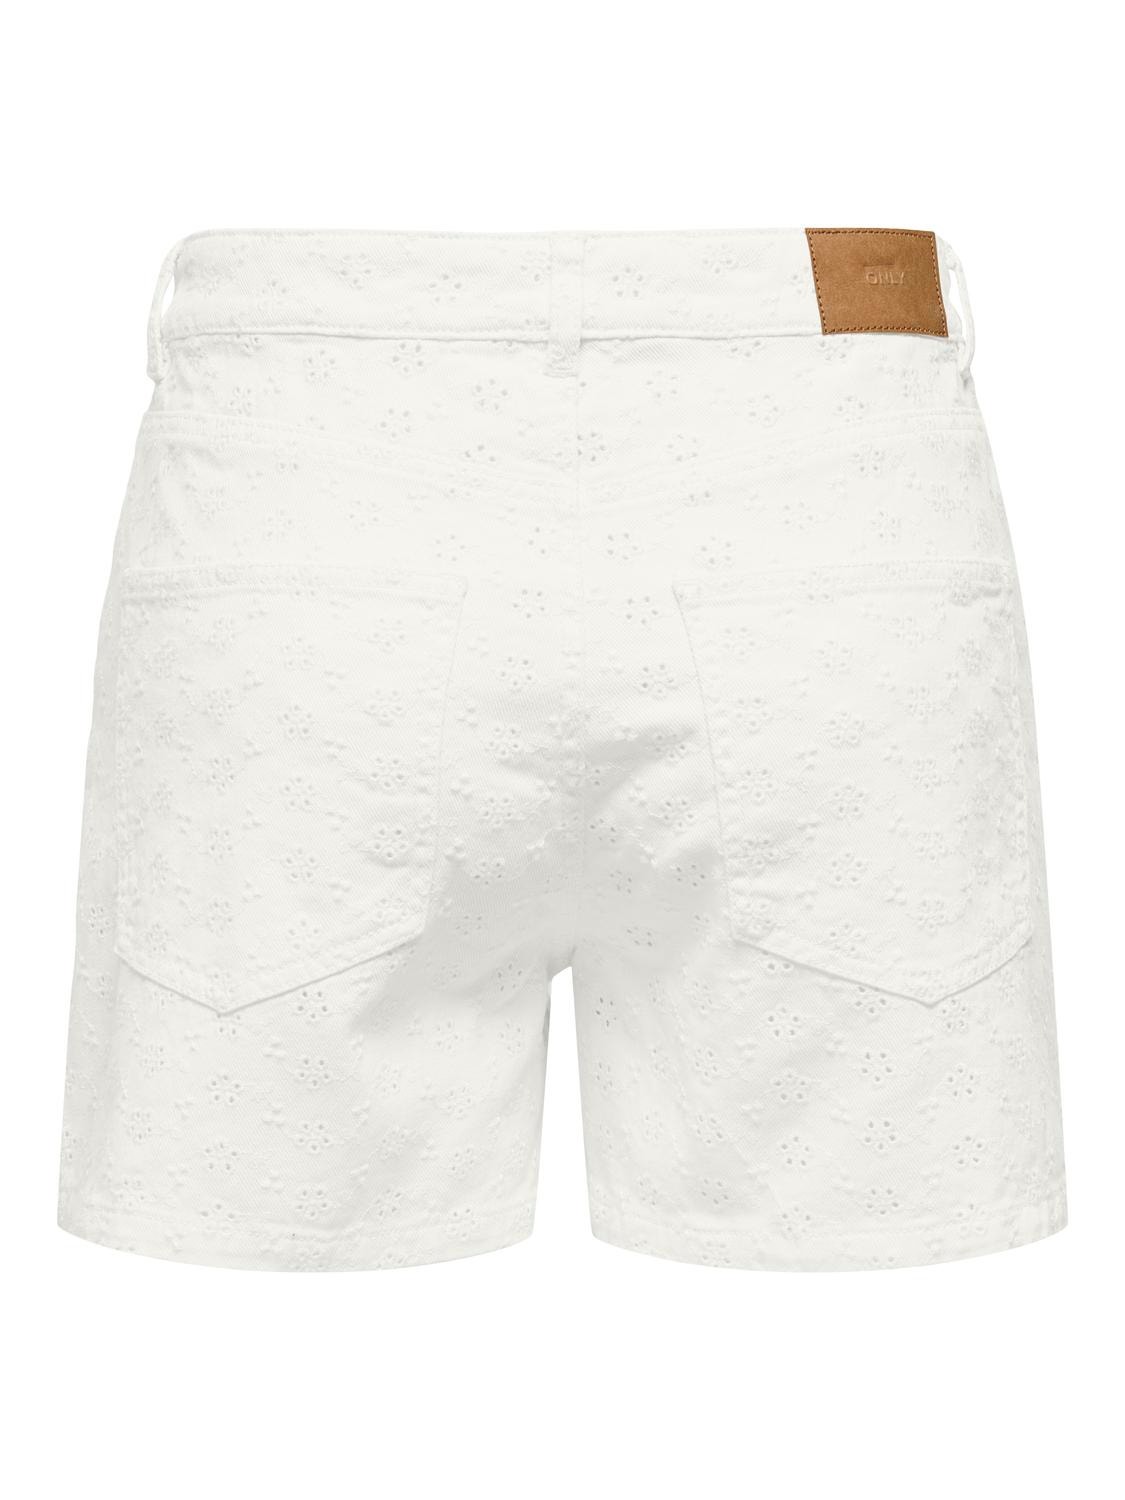 ONLY Patterned High waisted Shorts -Cloud Dancer - 15291508